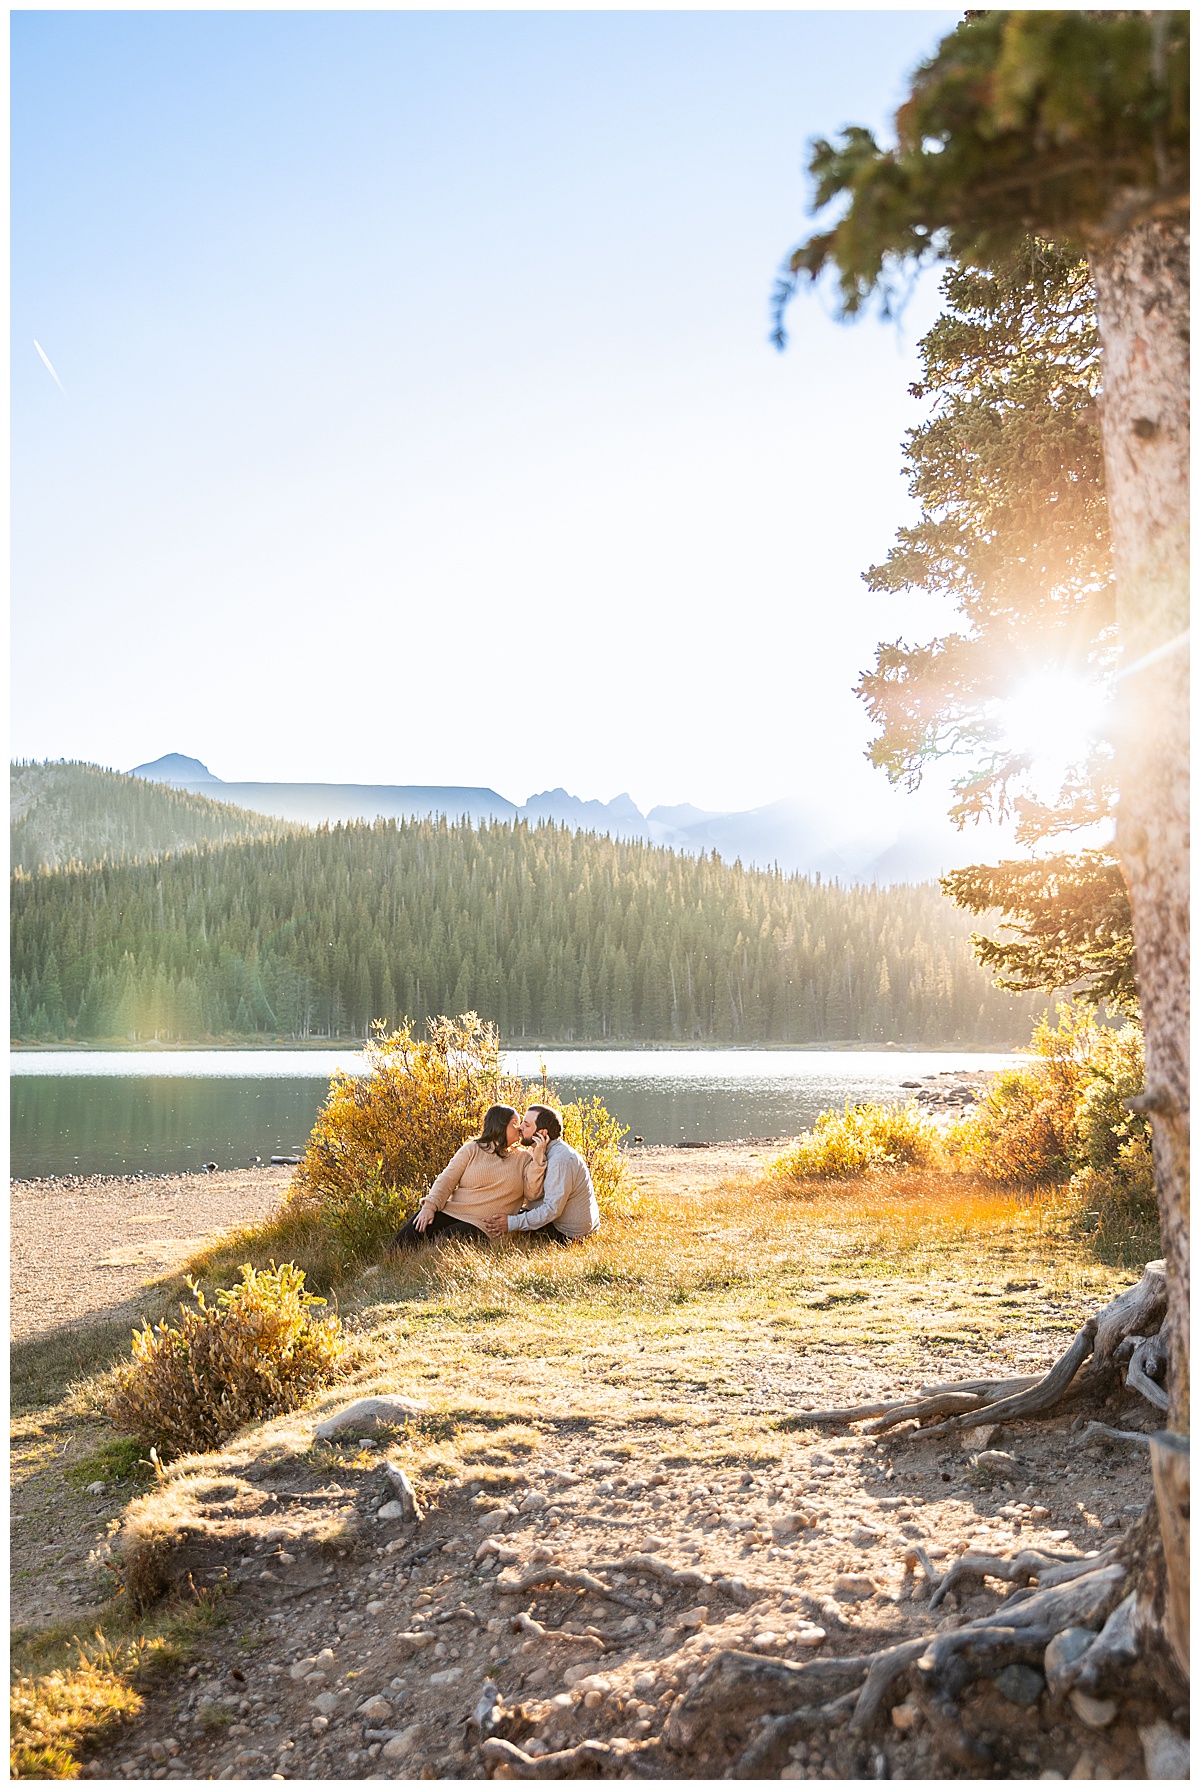 A couples poses for their fall lake engagement session in front of yellow bushes, a lake, and mountains. The man is wearing a gray long sleeve button down shirt and the woman is wearing a tan sweater